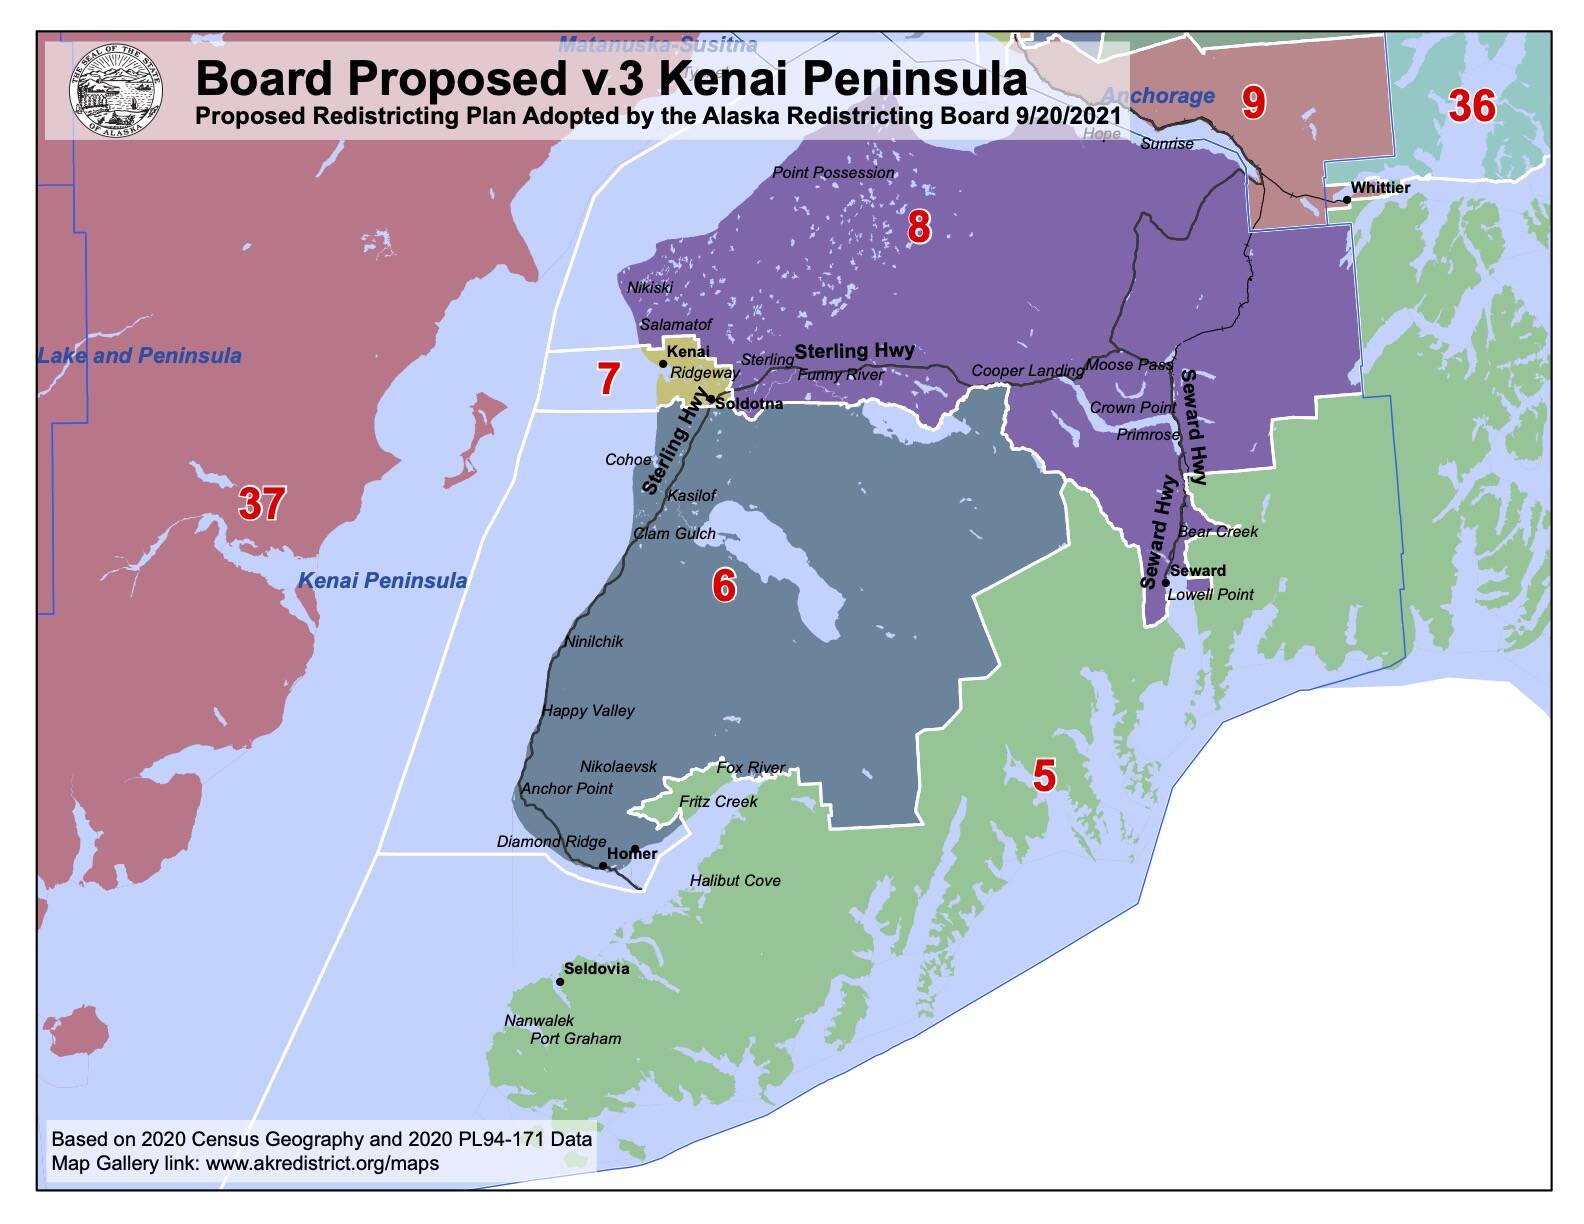 Version 3 of the Alaska Redistricting Board’s proposal for the Kenai Peninsula keeps intact most of District 31, now called District 6, but puts the Fritz Creek and Fox River areas into a new District 5 that includes the southern shore of Kachemak Bay and Kodiak Island. (Photo courtesy of Alaska Redistricting Board)